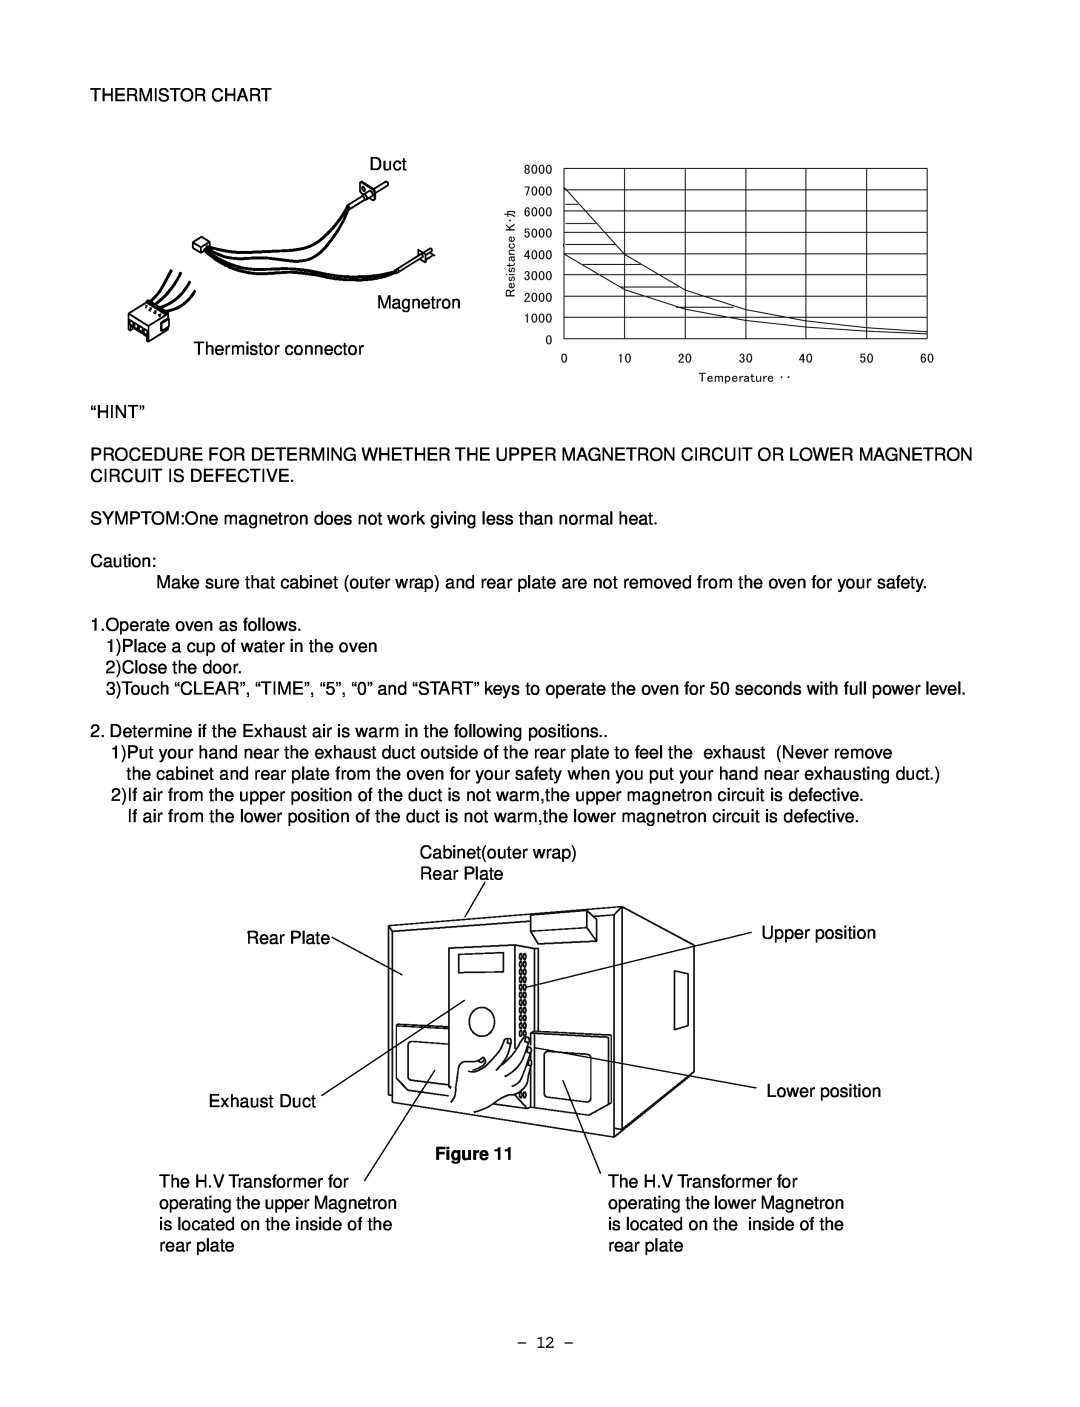 Garland EM-C180 service manual THERMISTOR CHART Duct Magnetron Thermistor connector “HINT” 